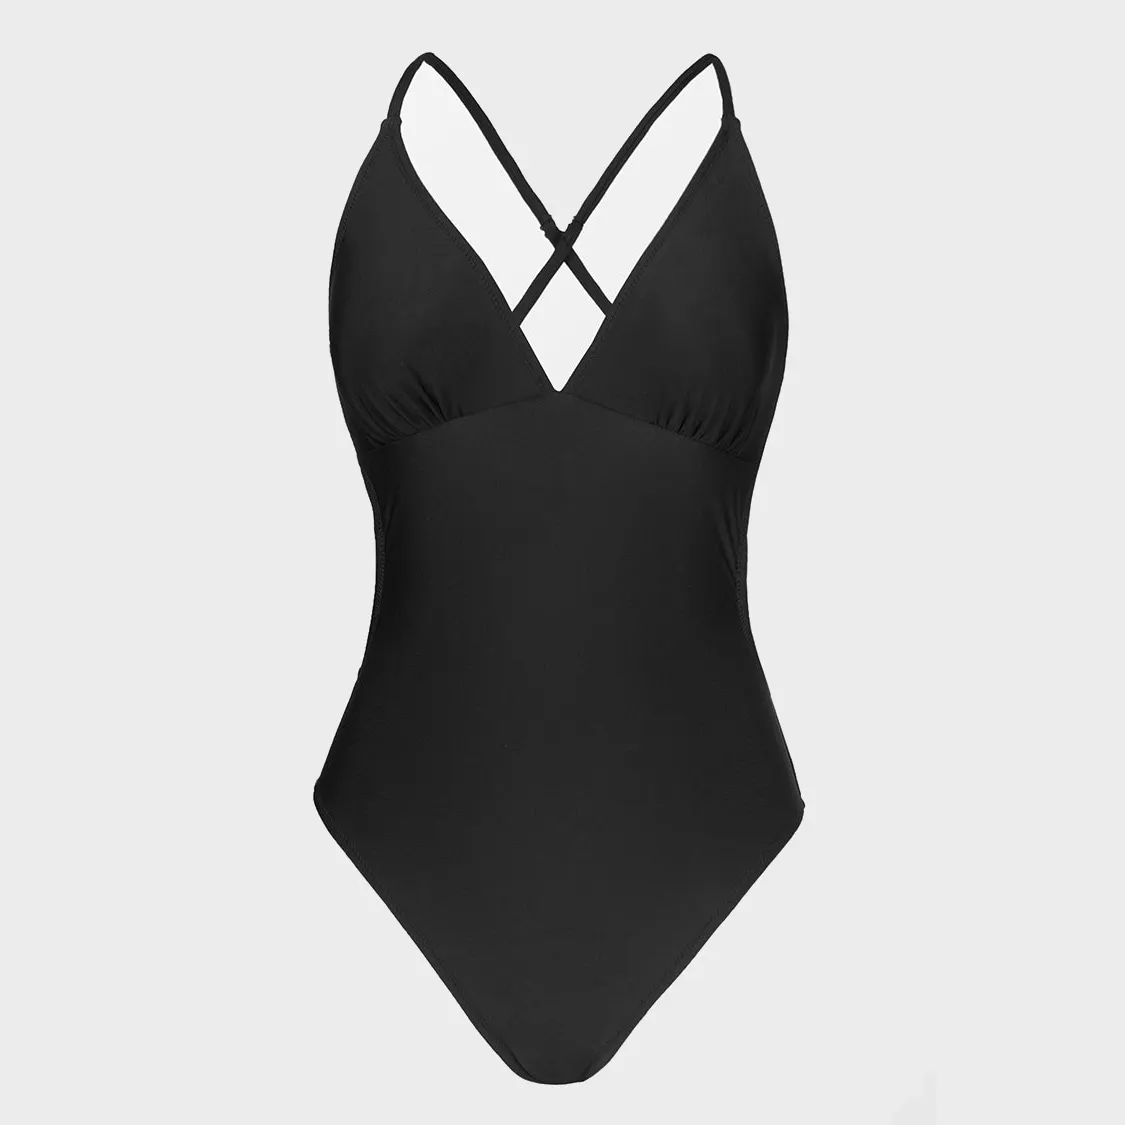 Women's fashion high cut one piece swimsuit sexy beach swimwear Black, blue and purple swimsuit for Ladies